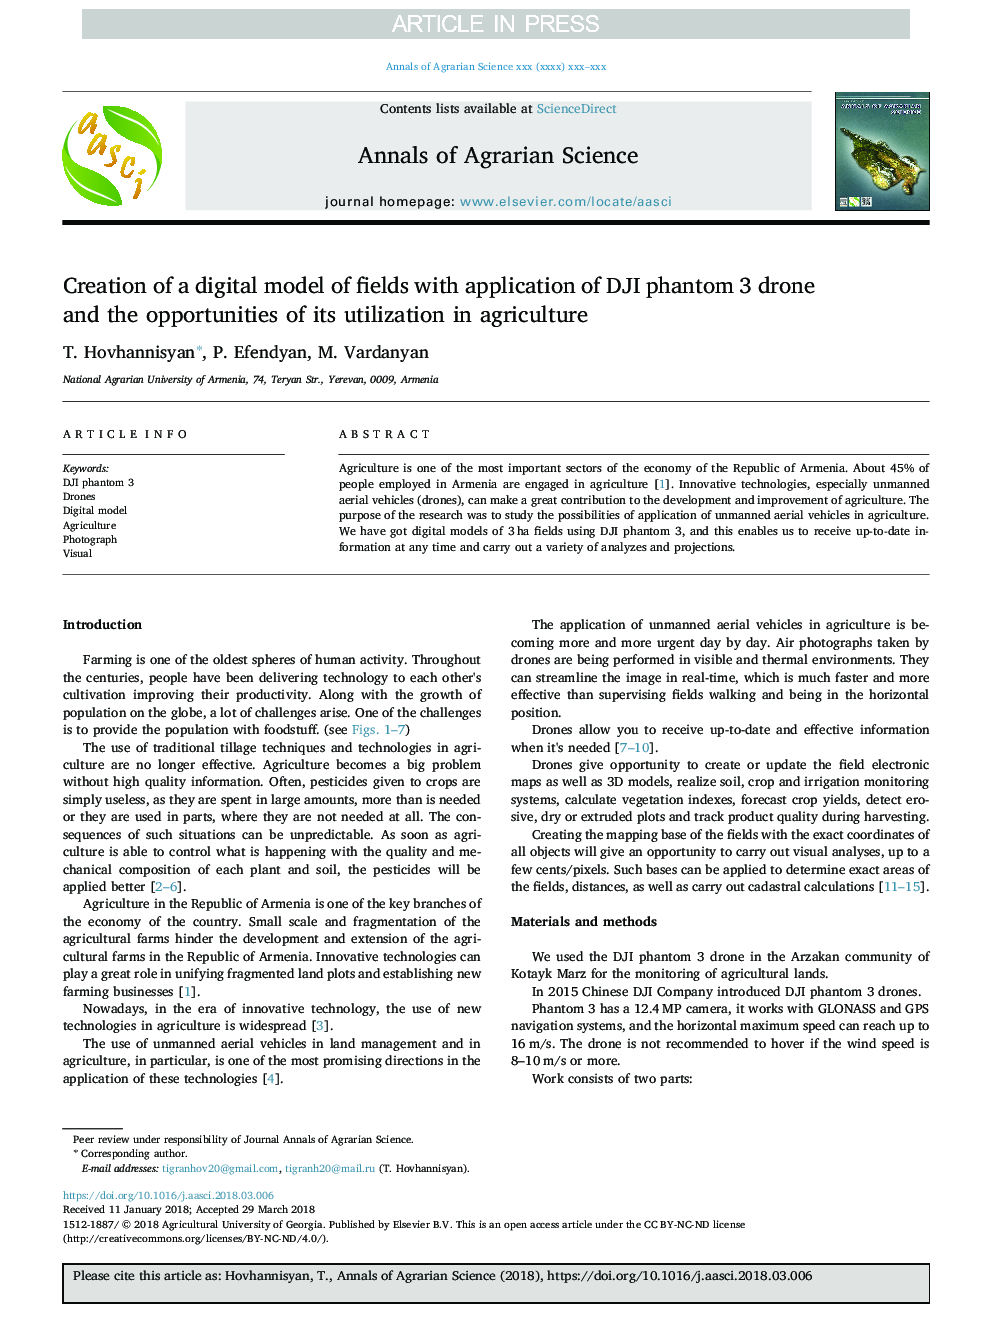 Creation of a digital model of fields with application of DJI phantom 3 drone and the opportunities of its utilization in agriculture